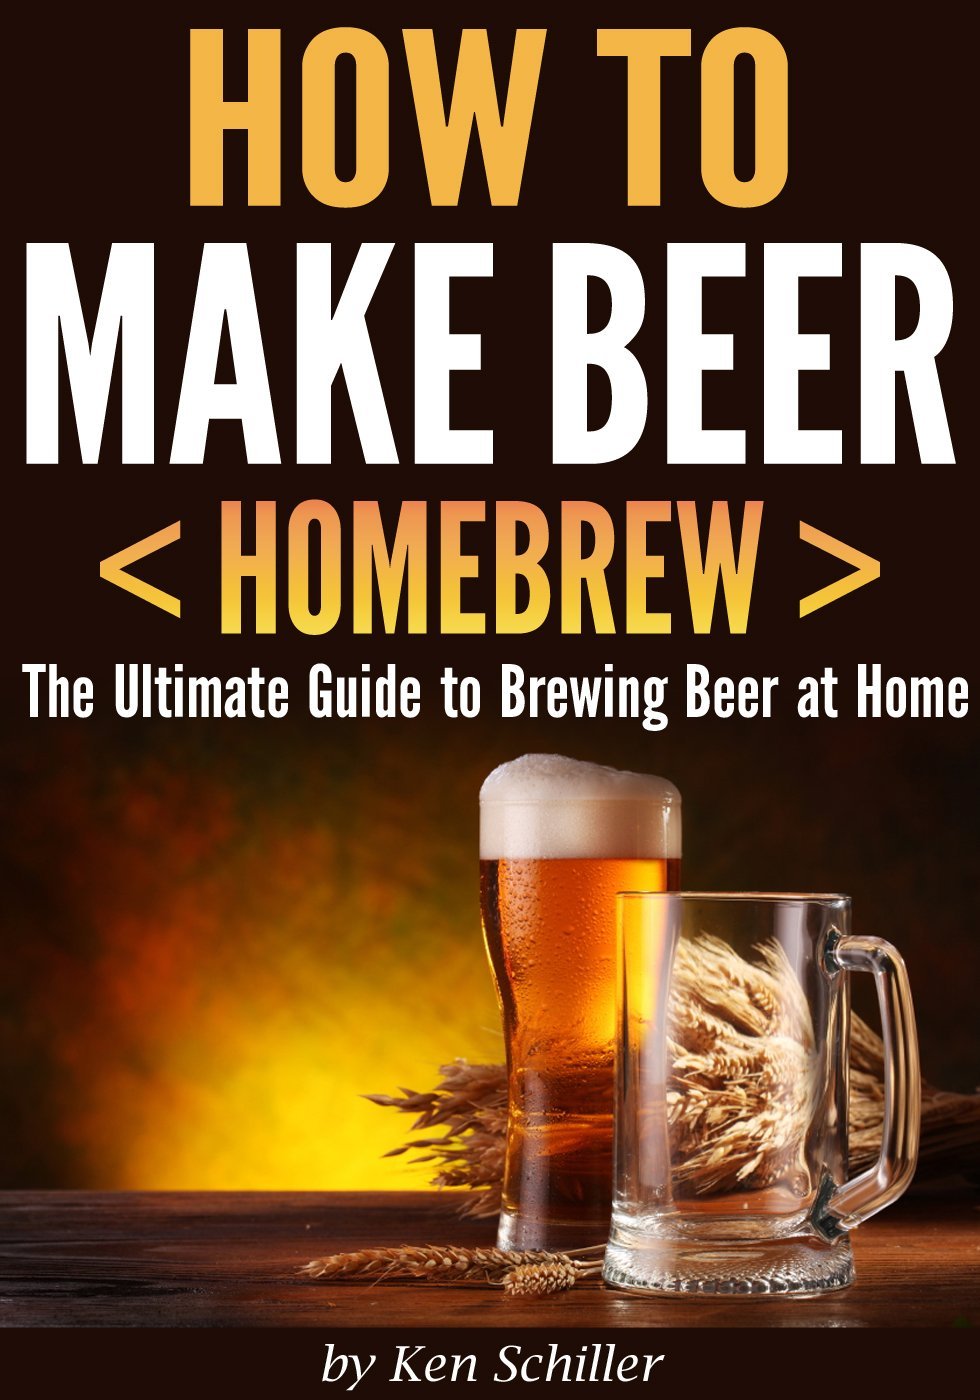 How to Make Beer (Homebrew): The Ultimate Guide to Brewing Beer at Home by Ken Schiller